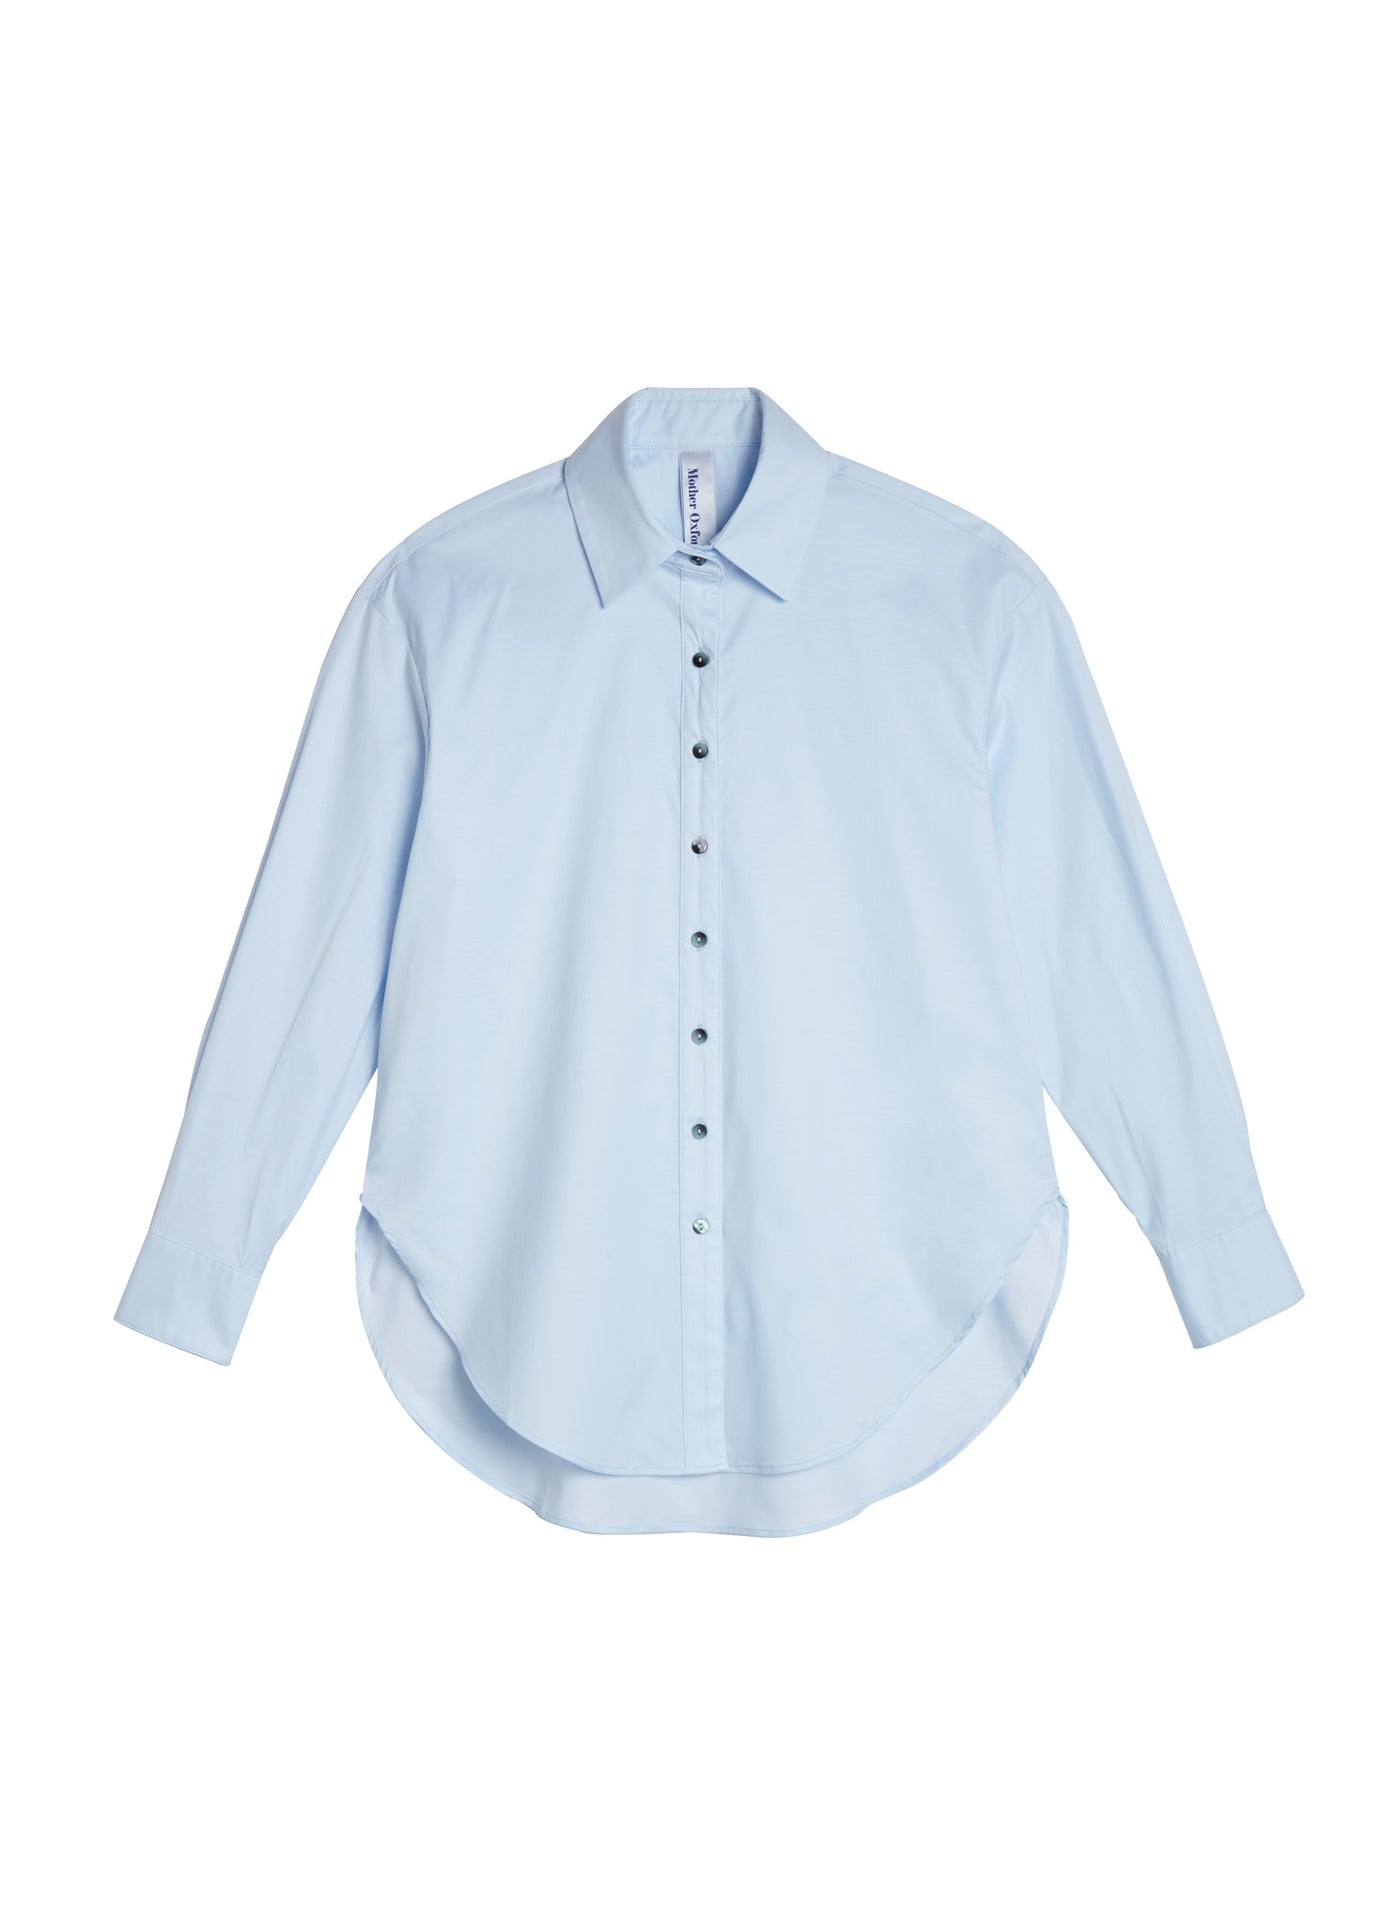 Mother Oxford Performance Button Up White Oxford Shirt for Moms